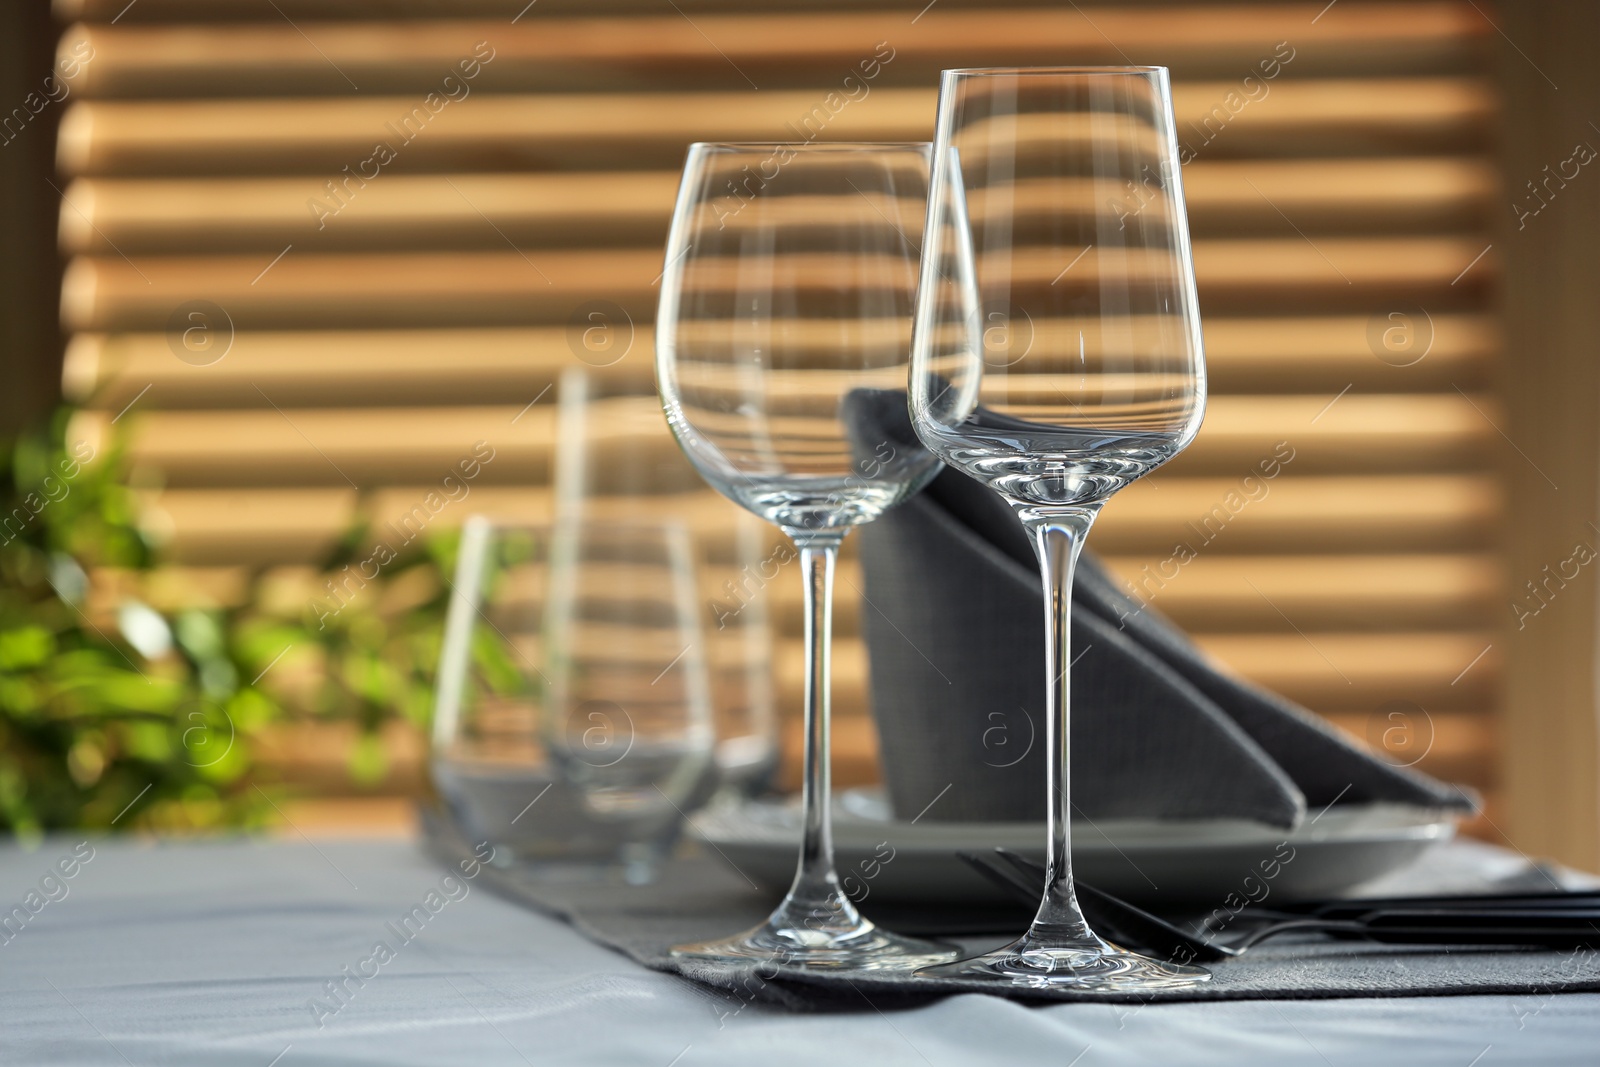 Photo of Table setting with empty wine glasses and napkin